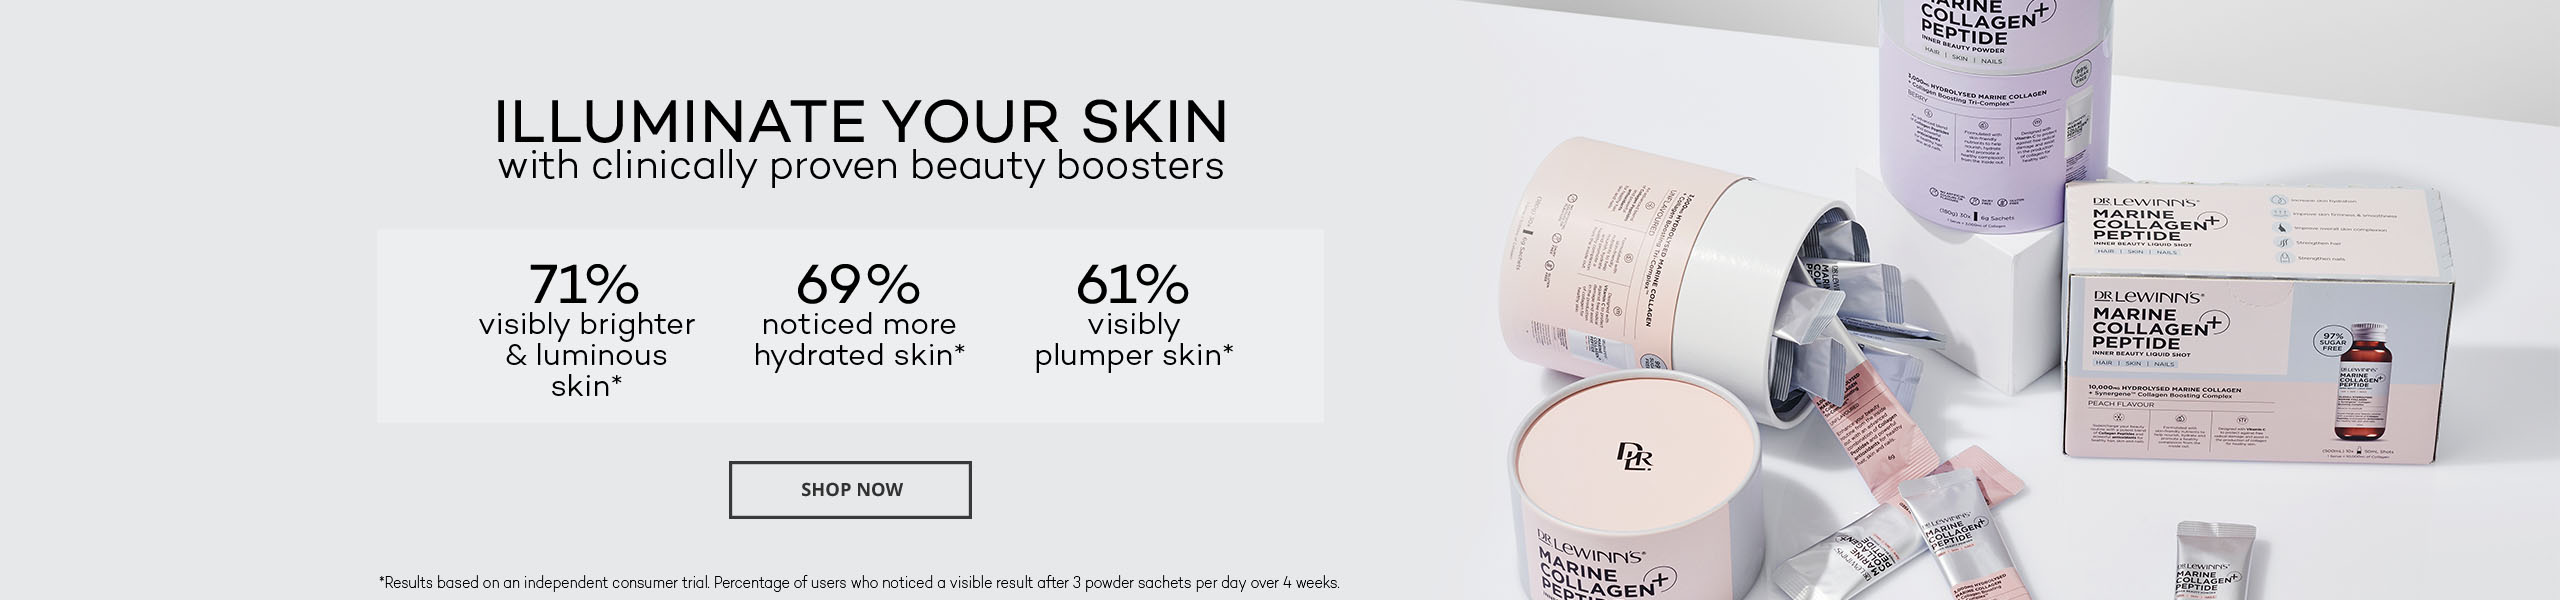 Illuminate your skin with clinically proven beauty boosters.